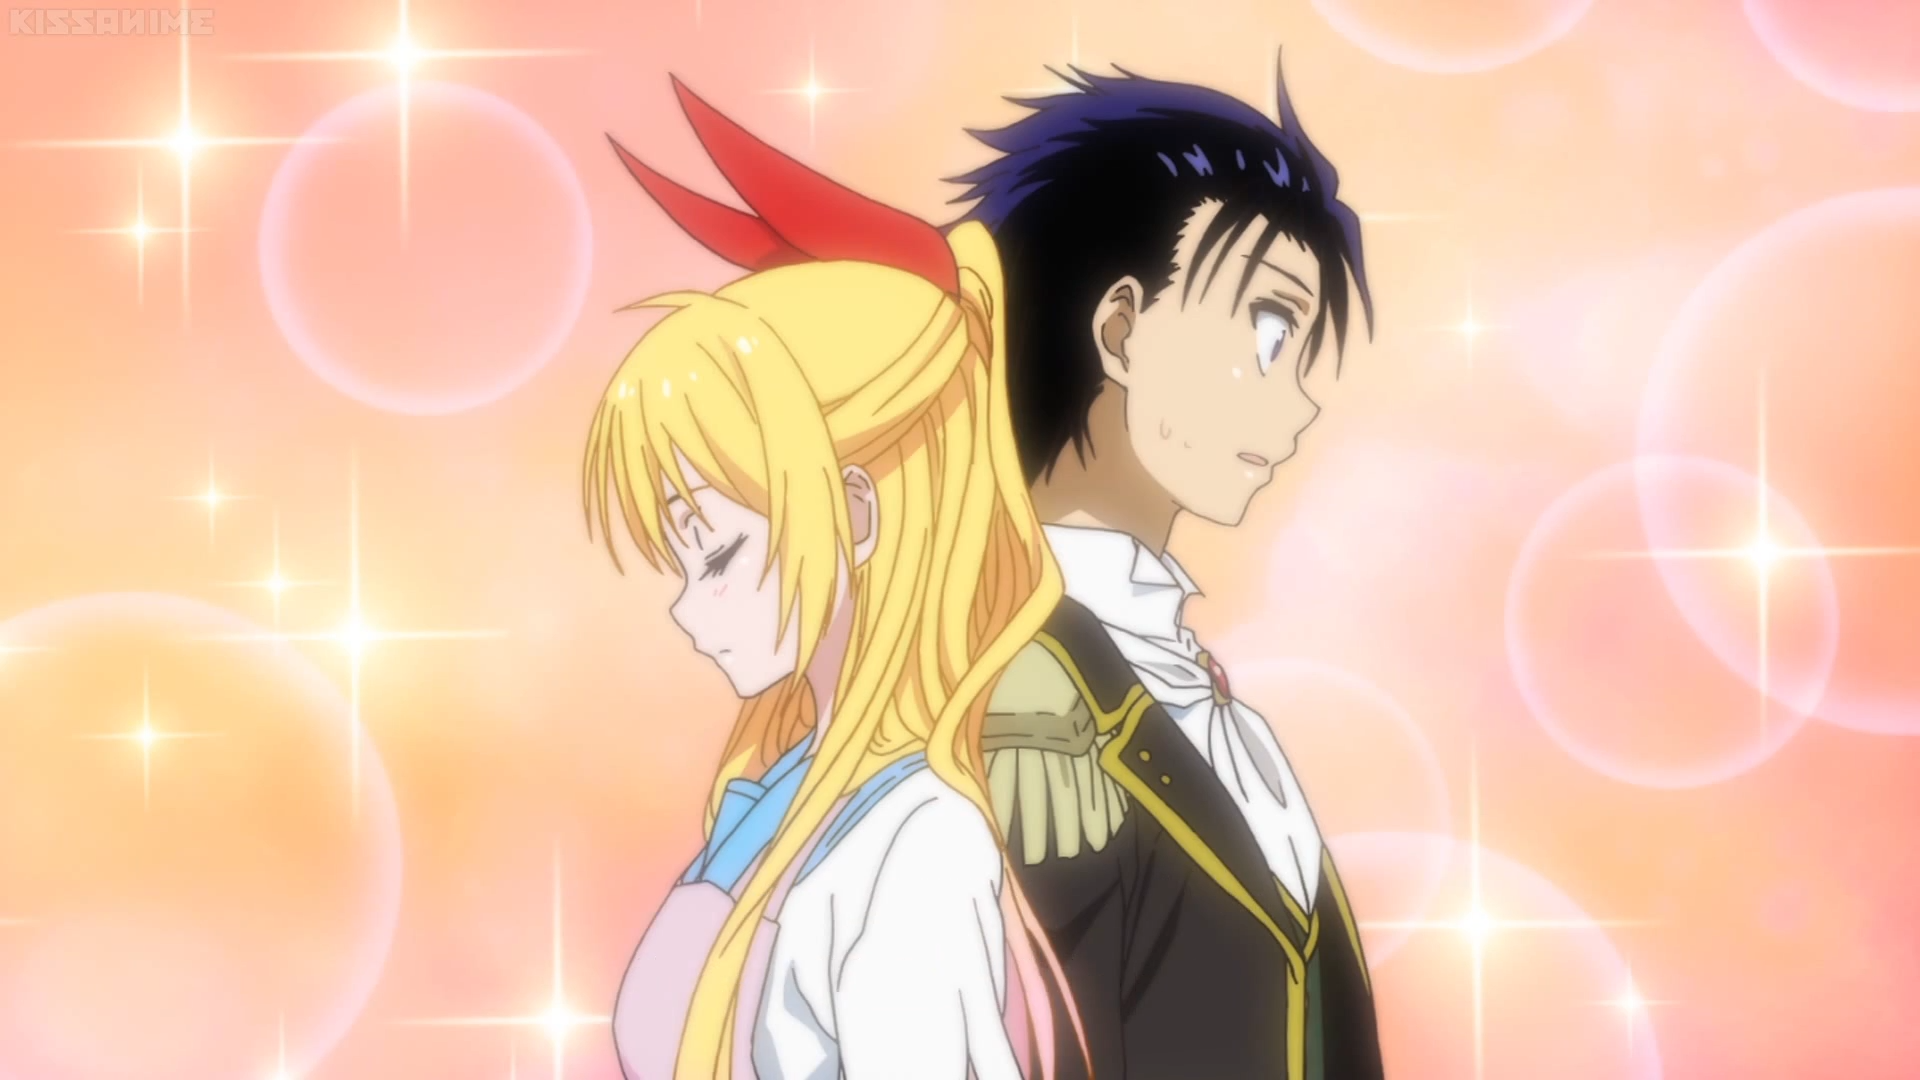 As things as they are now I would say Nisekoi  QQ  Bokuben  rWeCantStudy